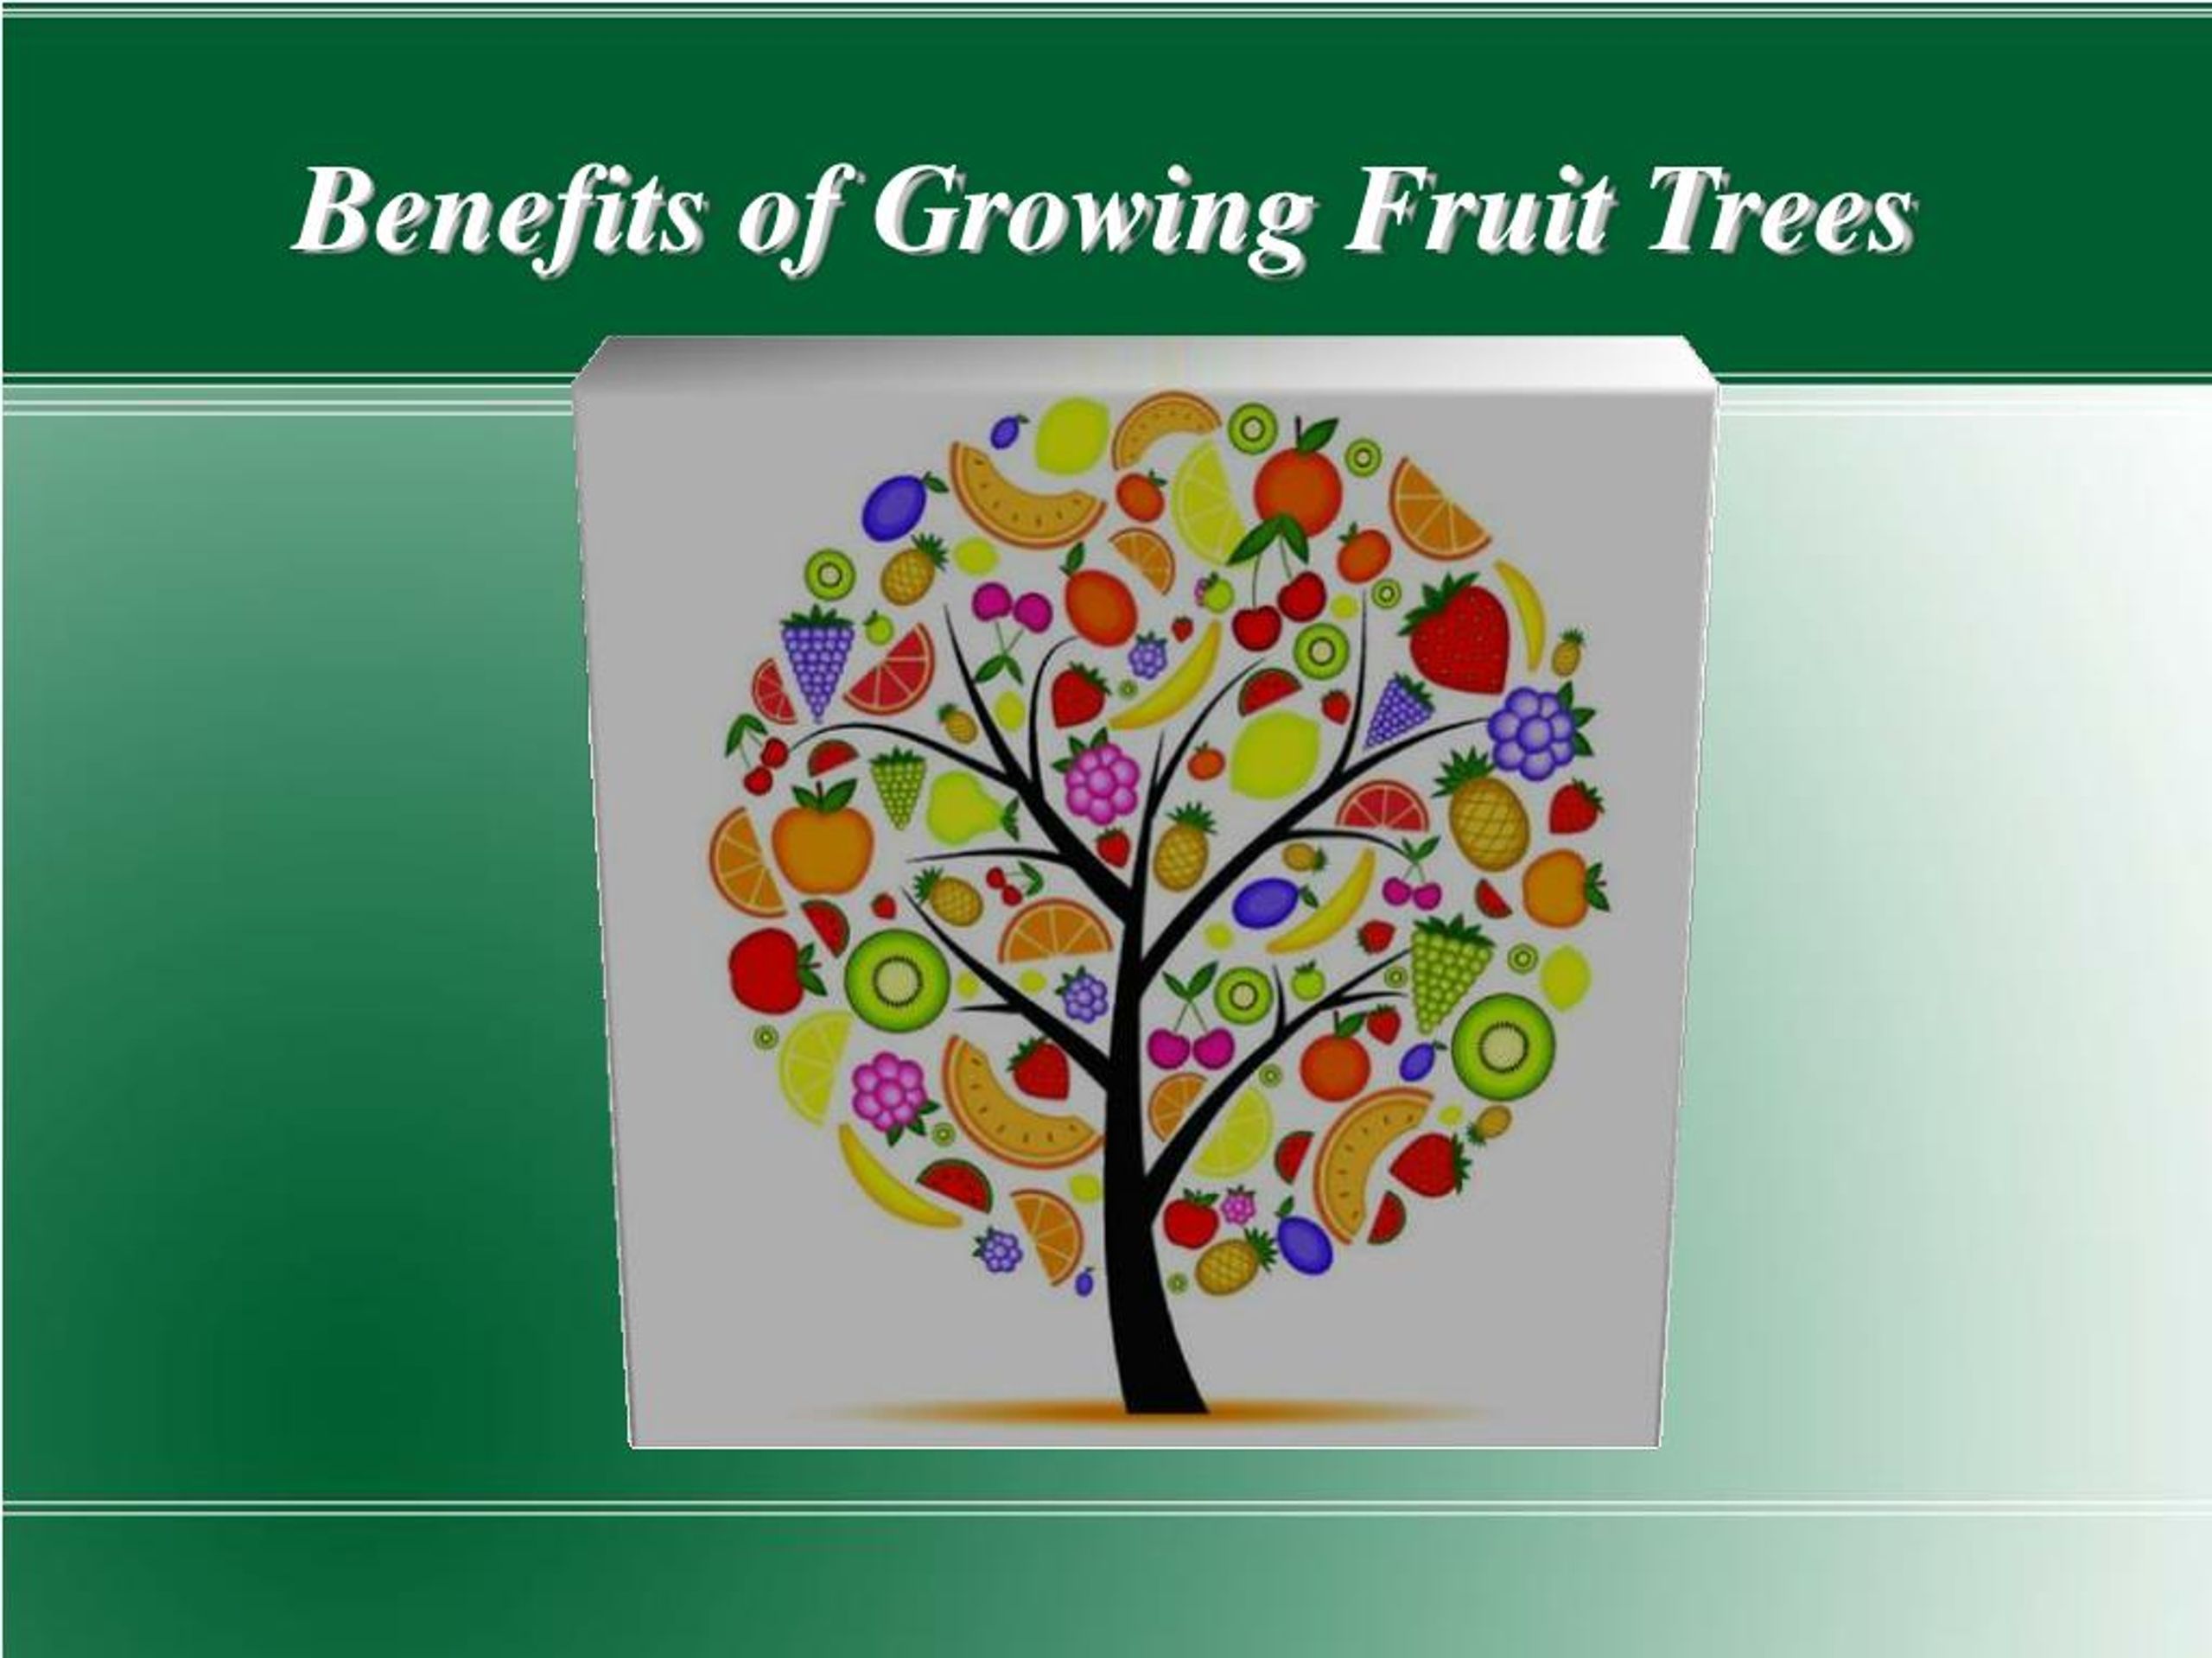 Propagating fruit trees ppt